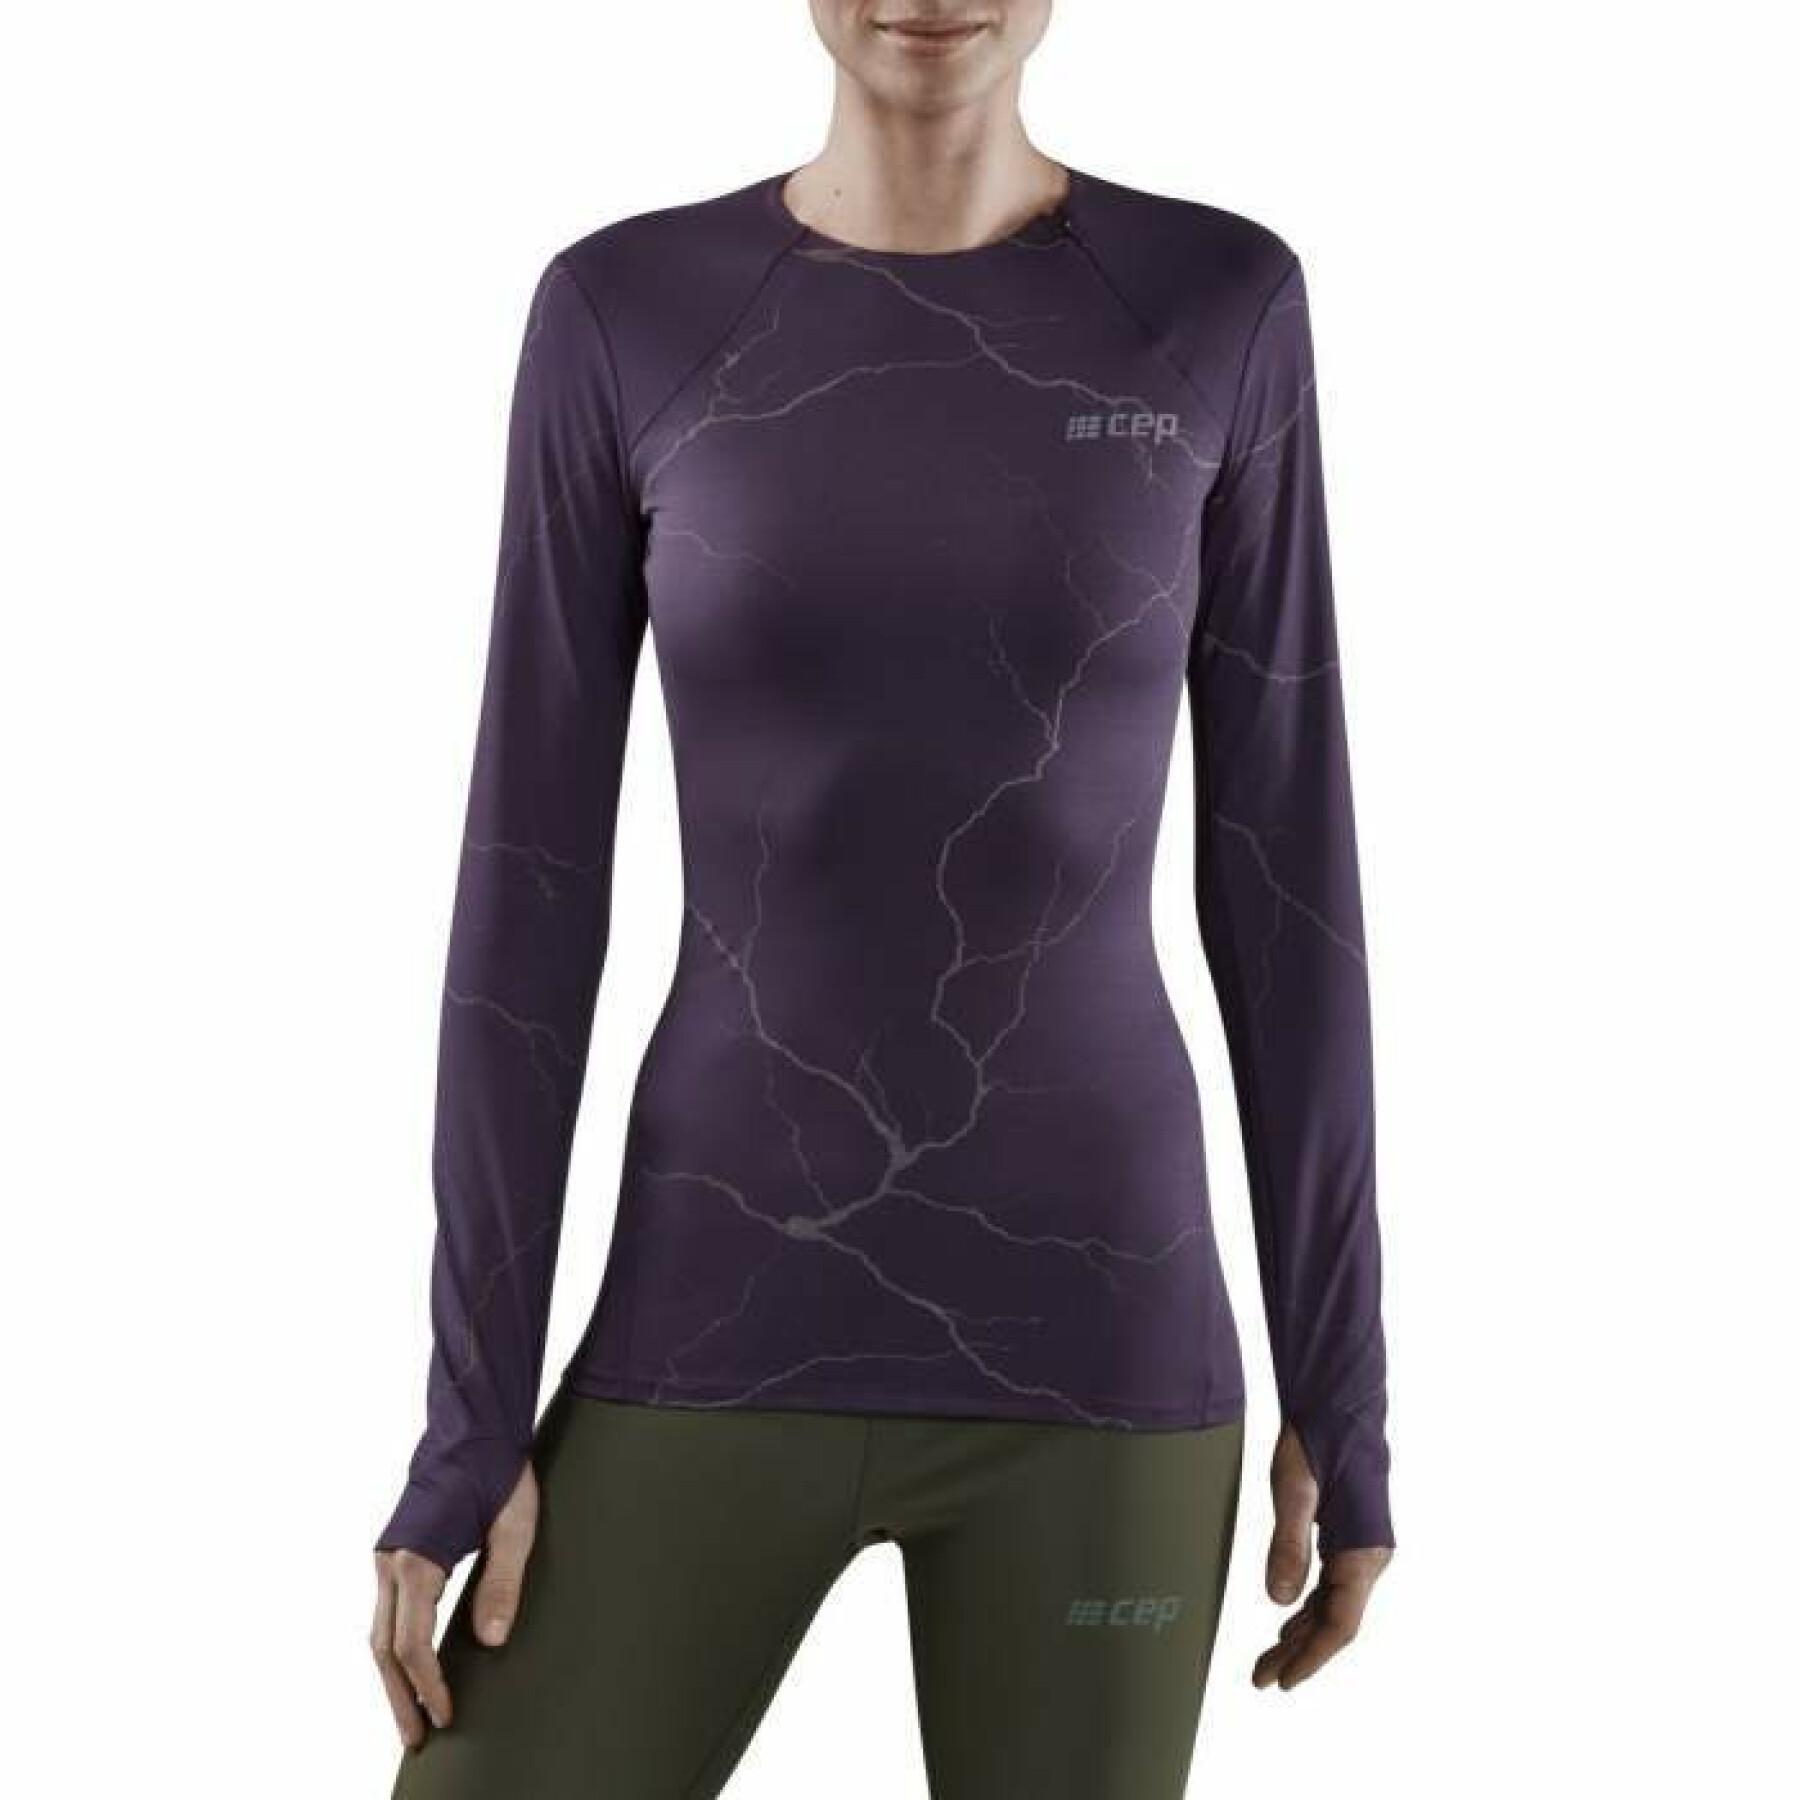 Maillot manches longues femme CEP Compression Reflective